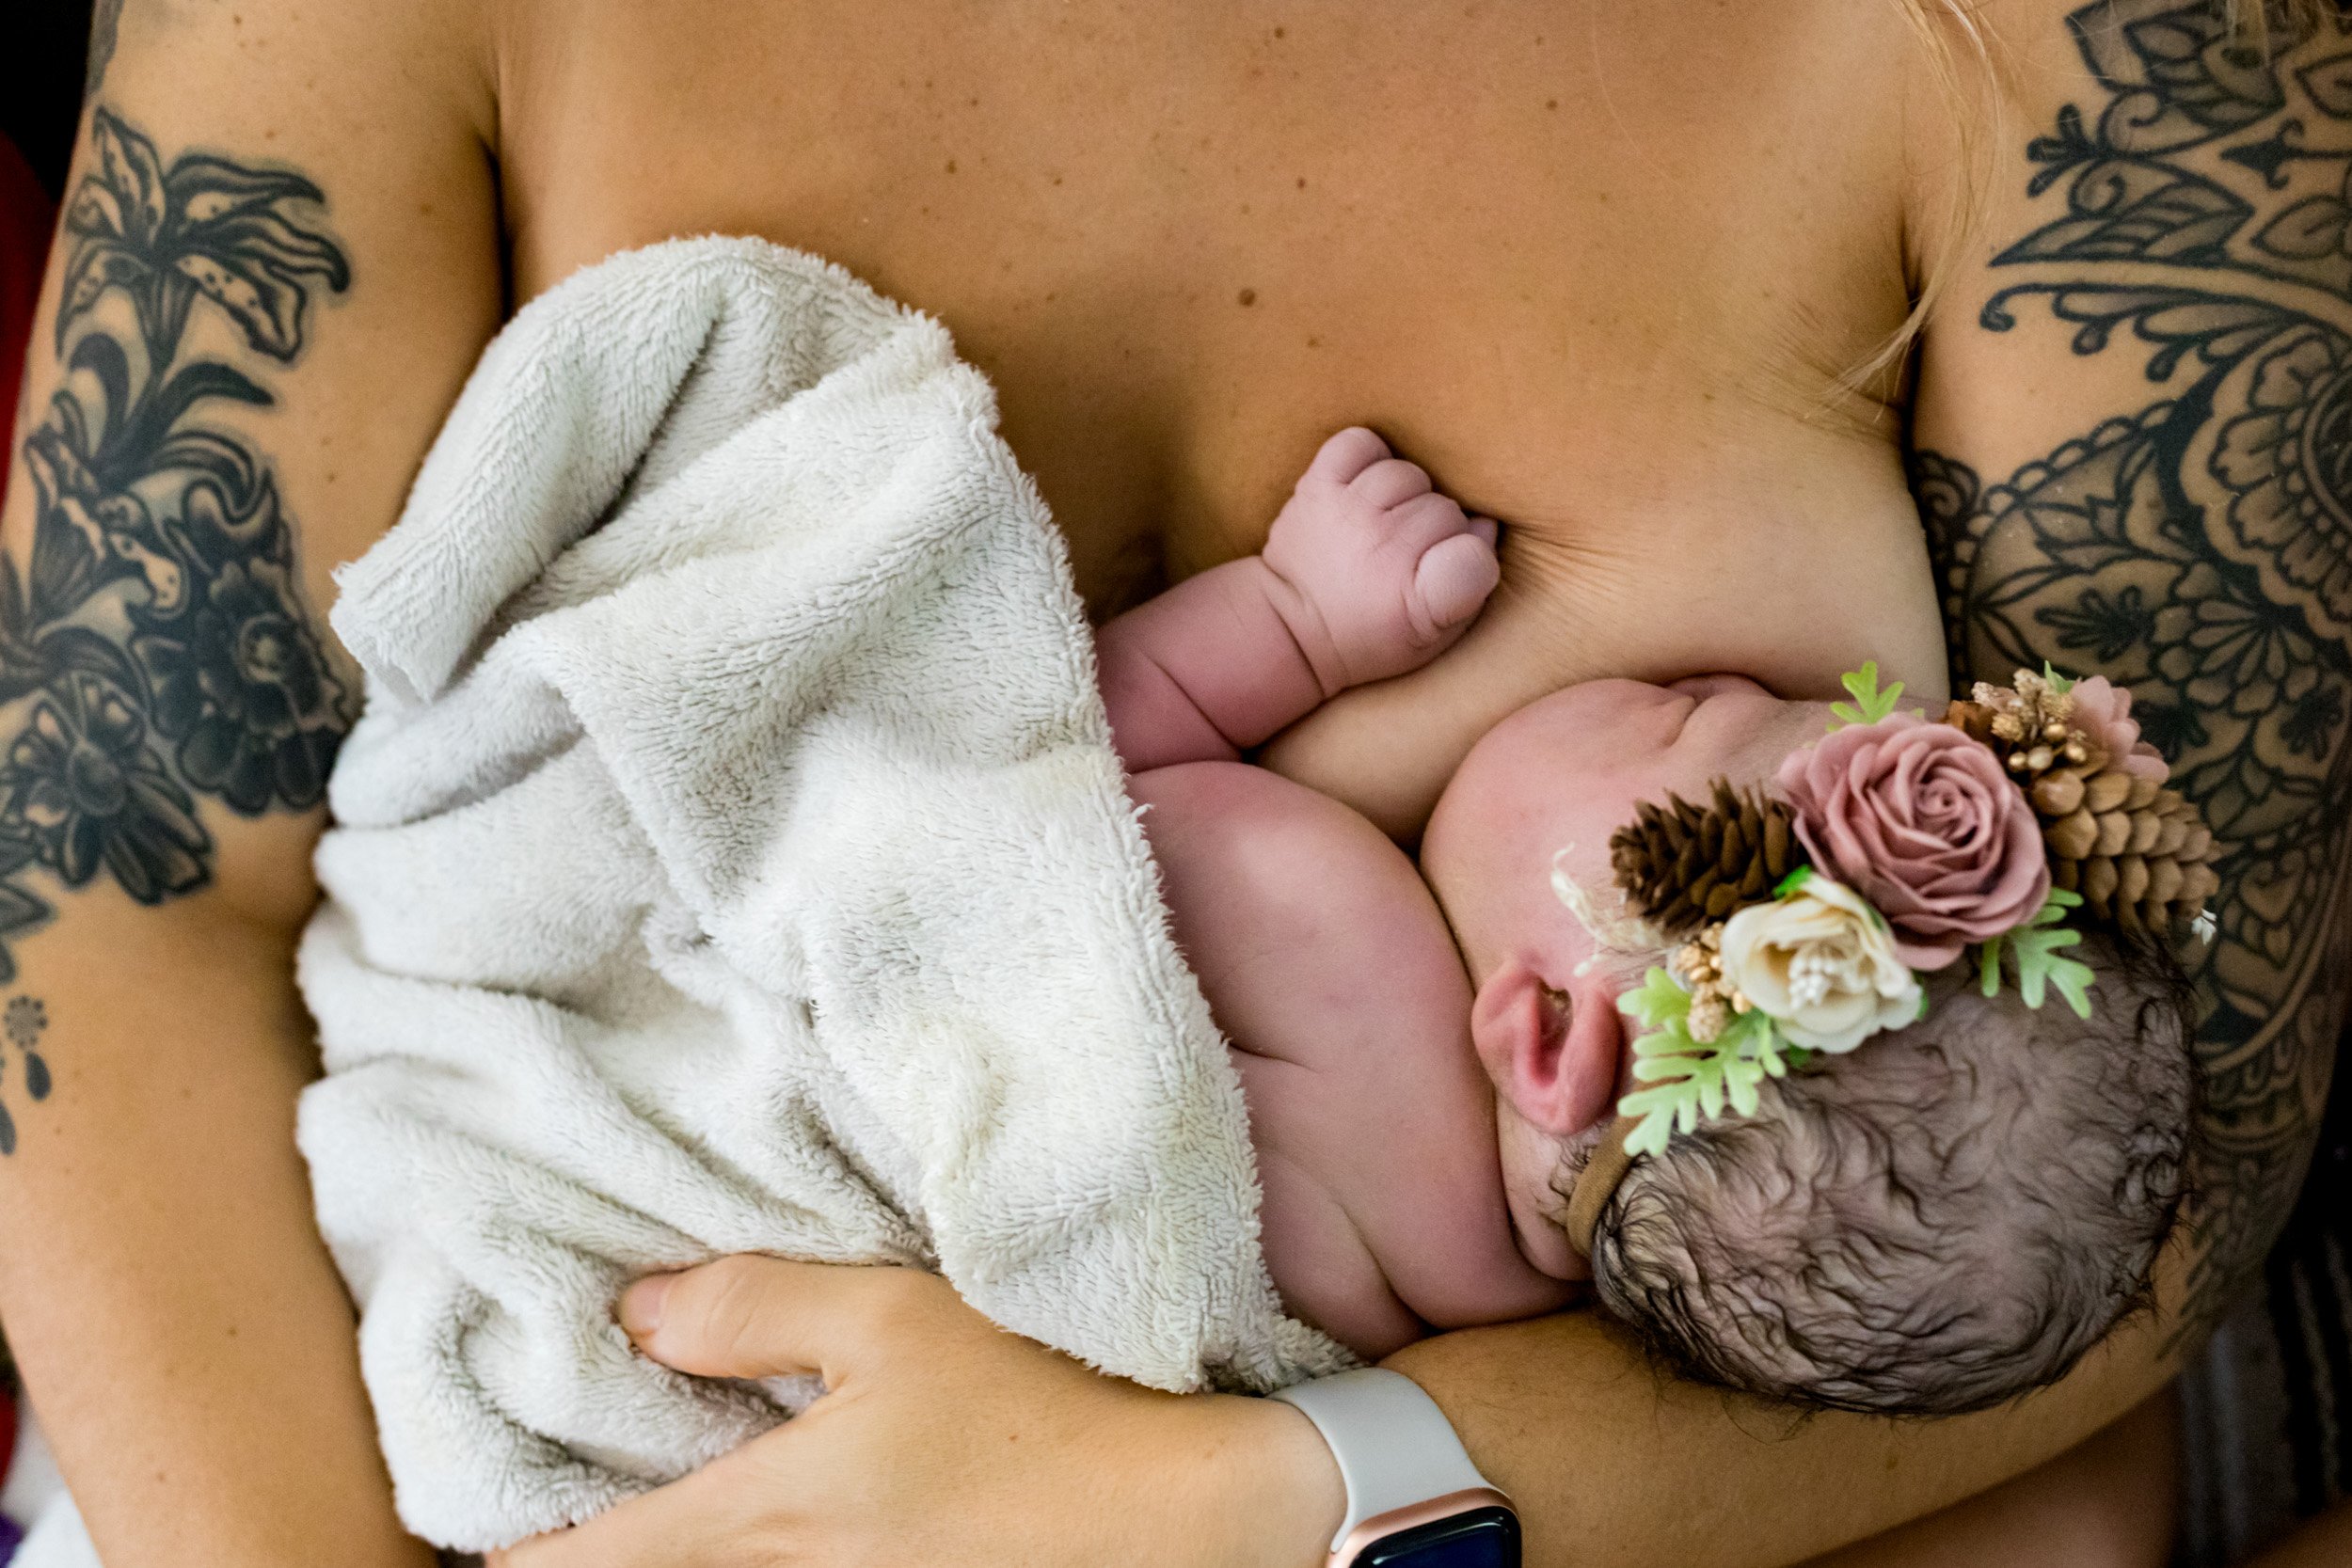 mom holding her newborn baby girl, just after birth